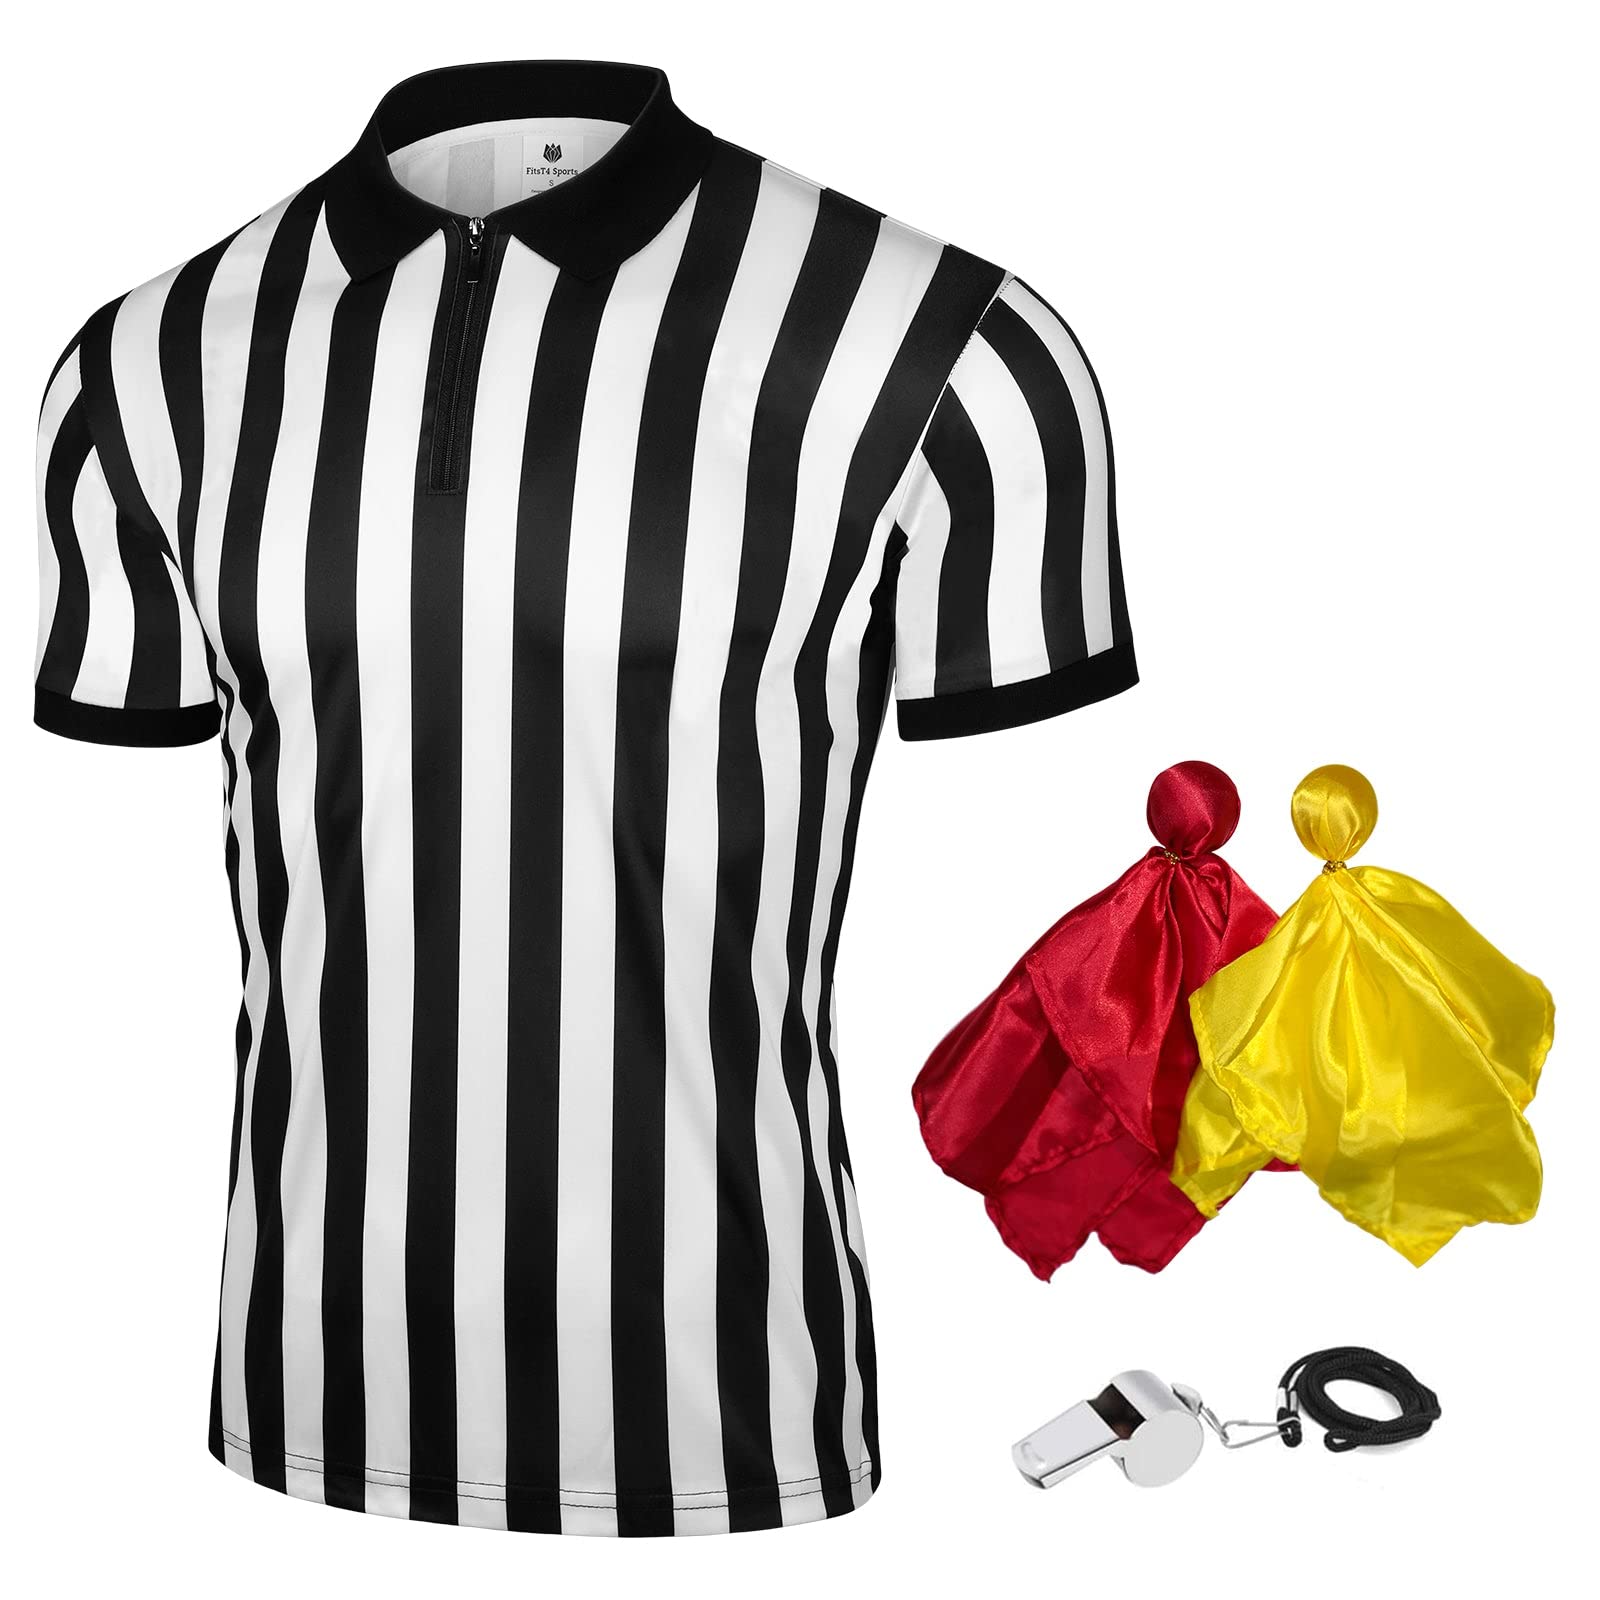 FitsT4 Mens Referee Shirt 4PCS Official Umpire Jersey with Yellow